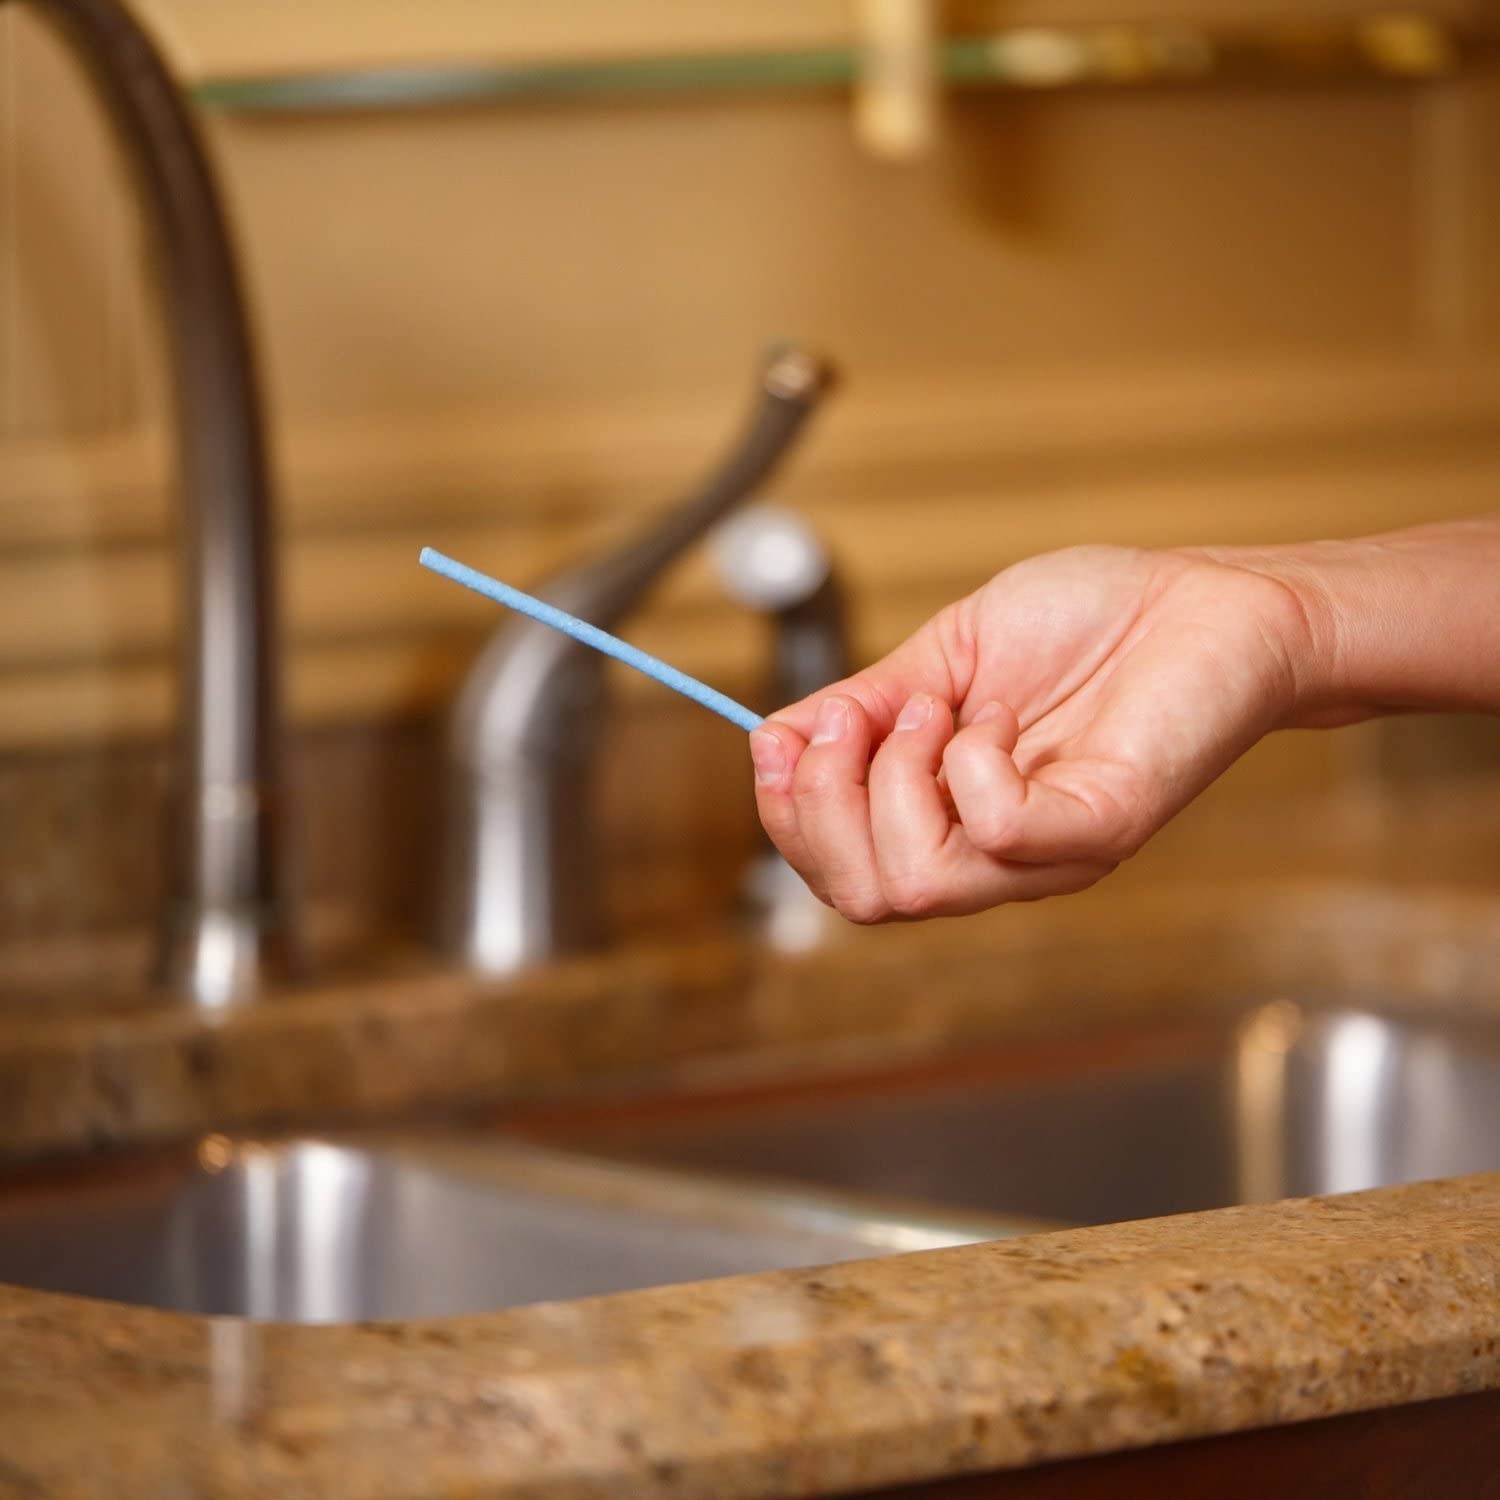 A person holding one of the sticks in front of a sink